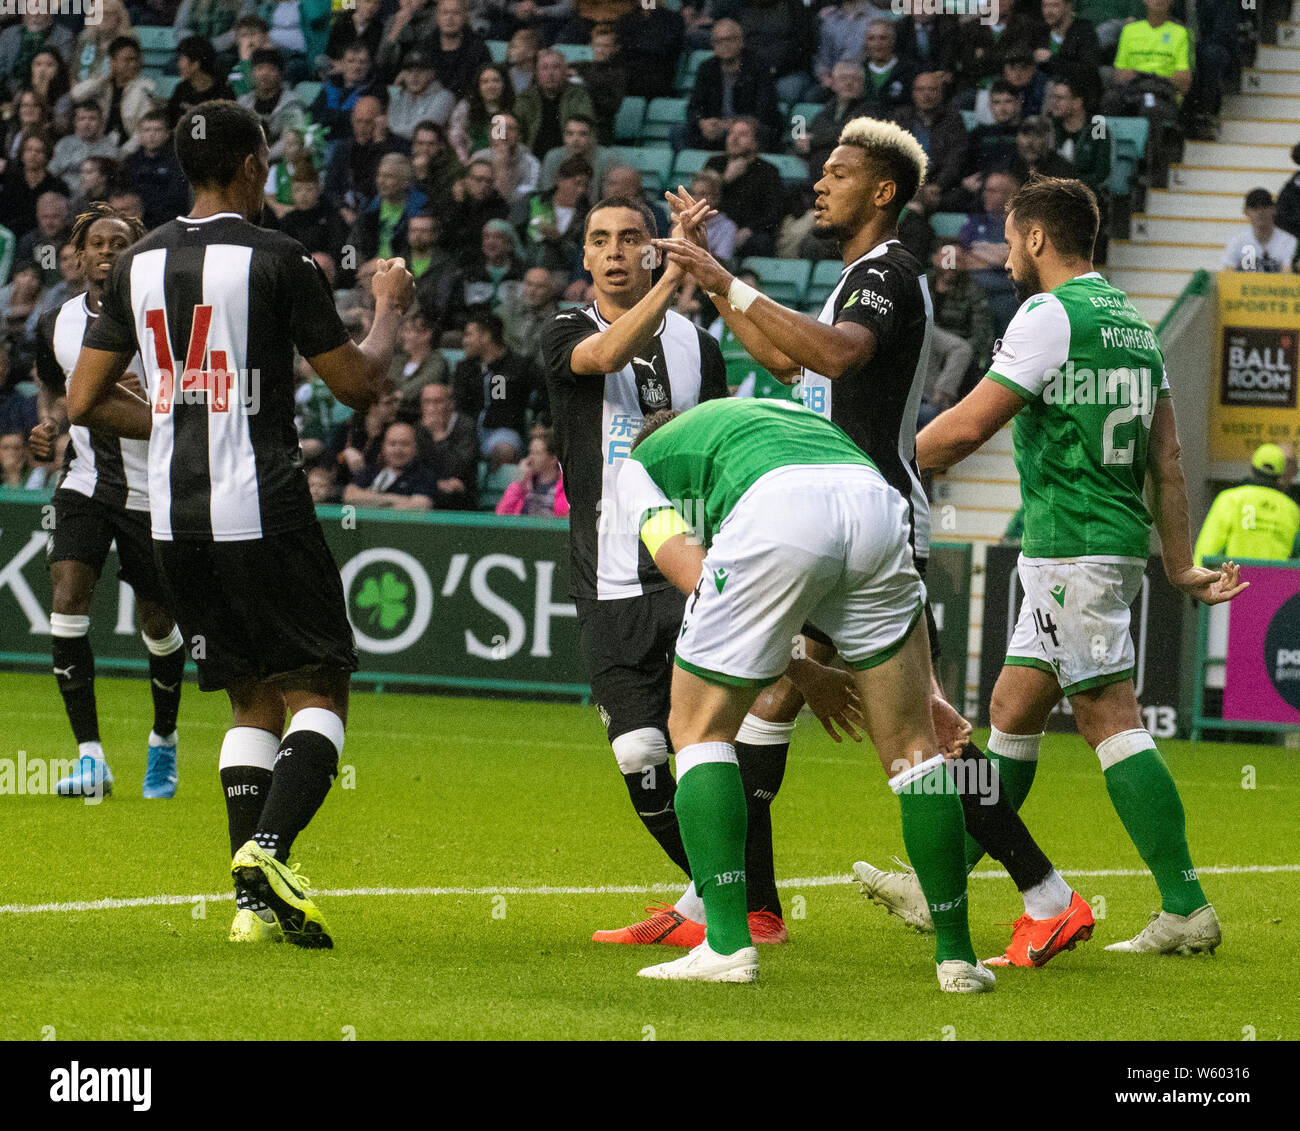 EDINBURGH, SCOTLAND - JULY 28:  Newcastle Utd's record signing, Brazilian striker, Joelinton, is mobbed by teammates after scoring his first goal for the club to equalise during the first half of the Pre-Season Friendly match between Hibernian and Newcastle United on July 28, 2019 in Edinburgh, Scotland. (Photo by Alamy/Ian Jacobs) Stock Photo